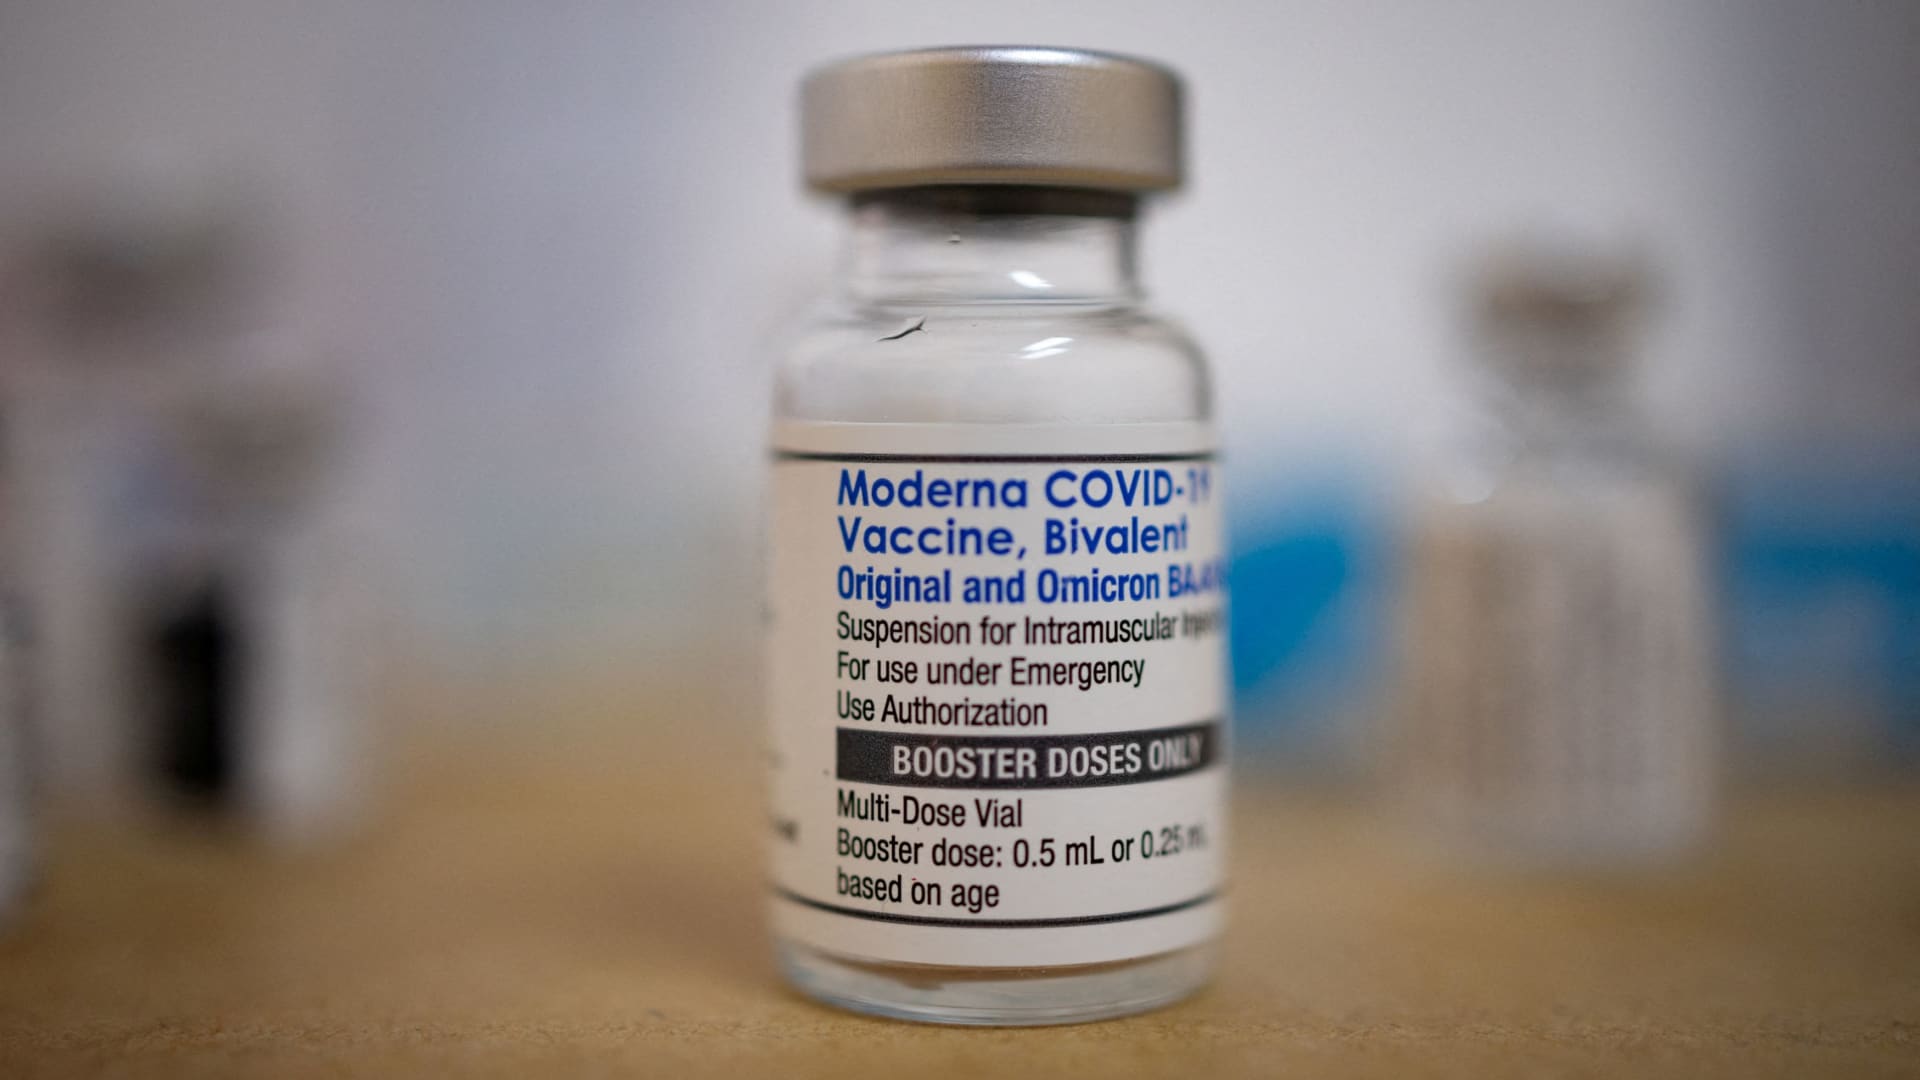 CDC recommends updated Covid vaccines for everyone ages 6 months and up